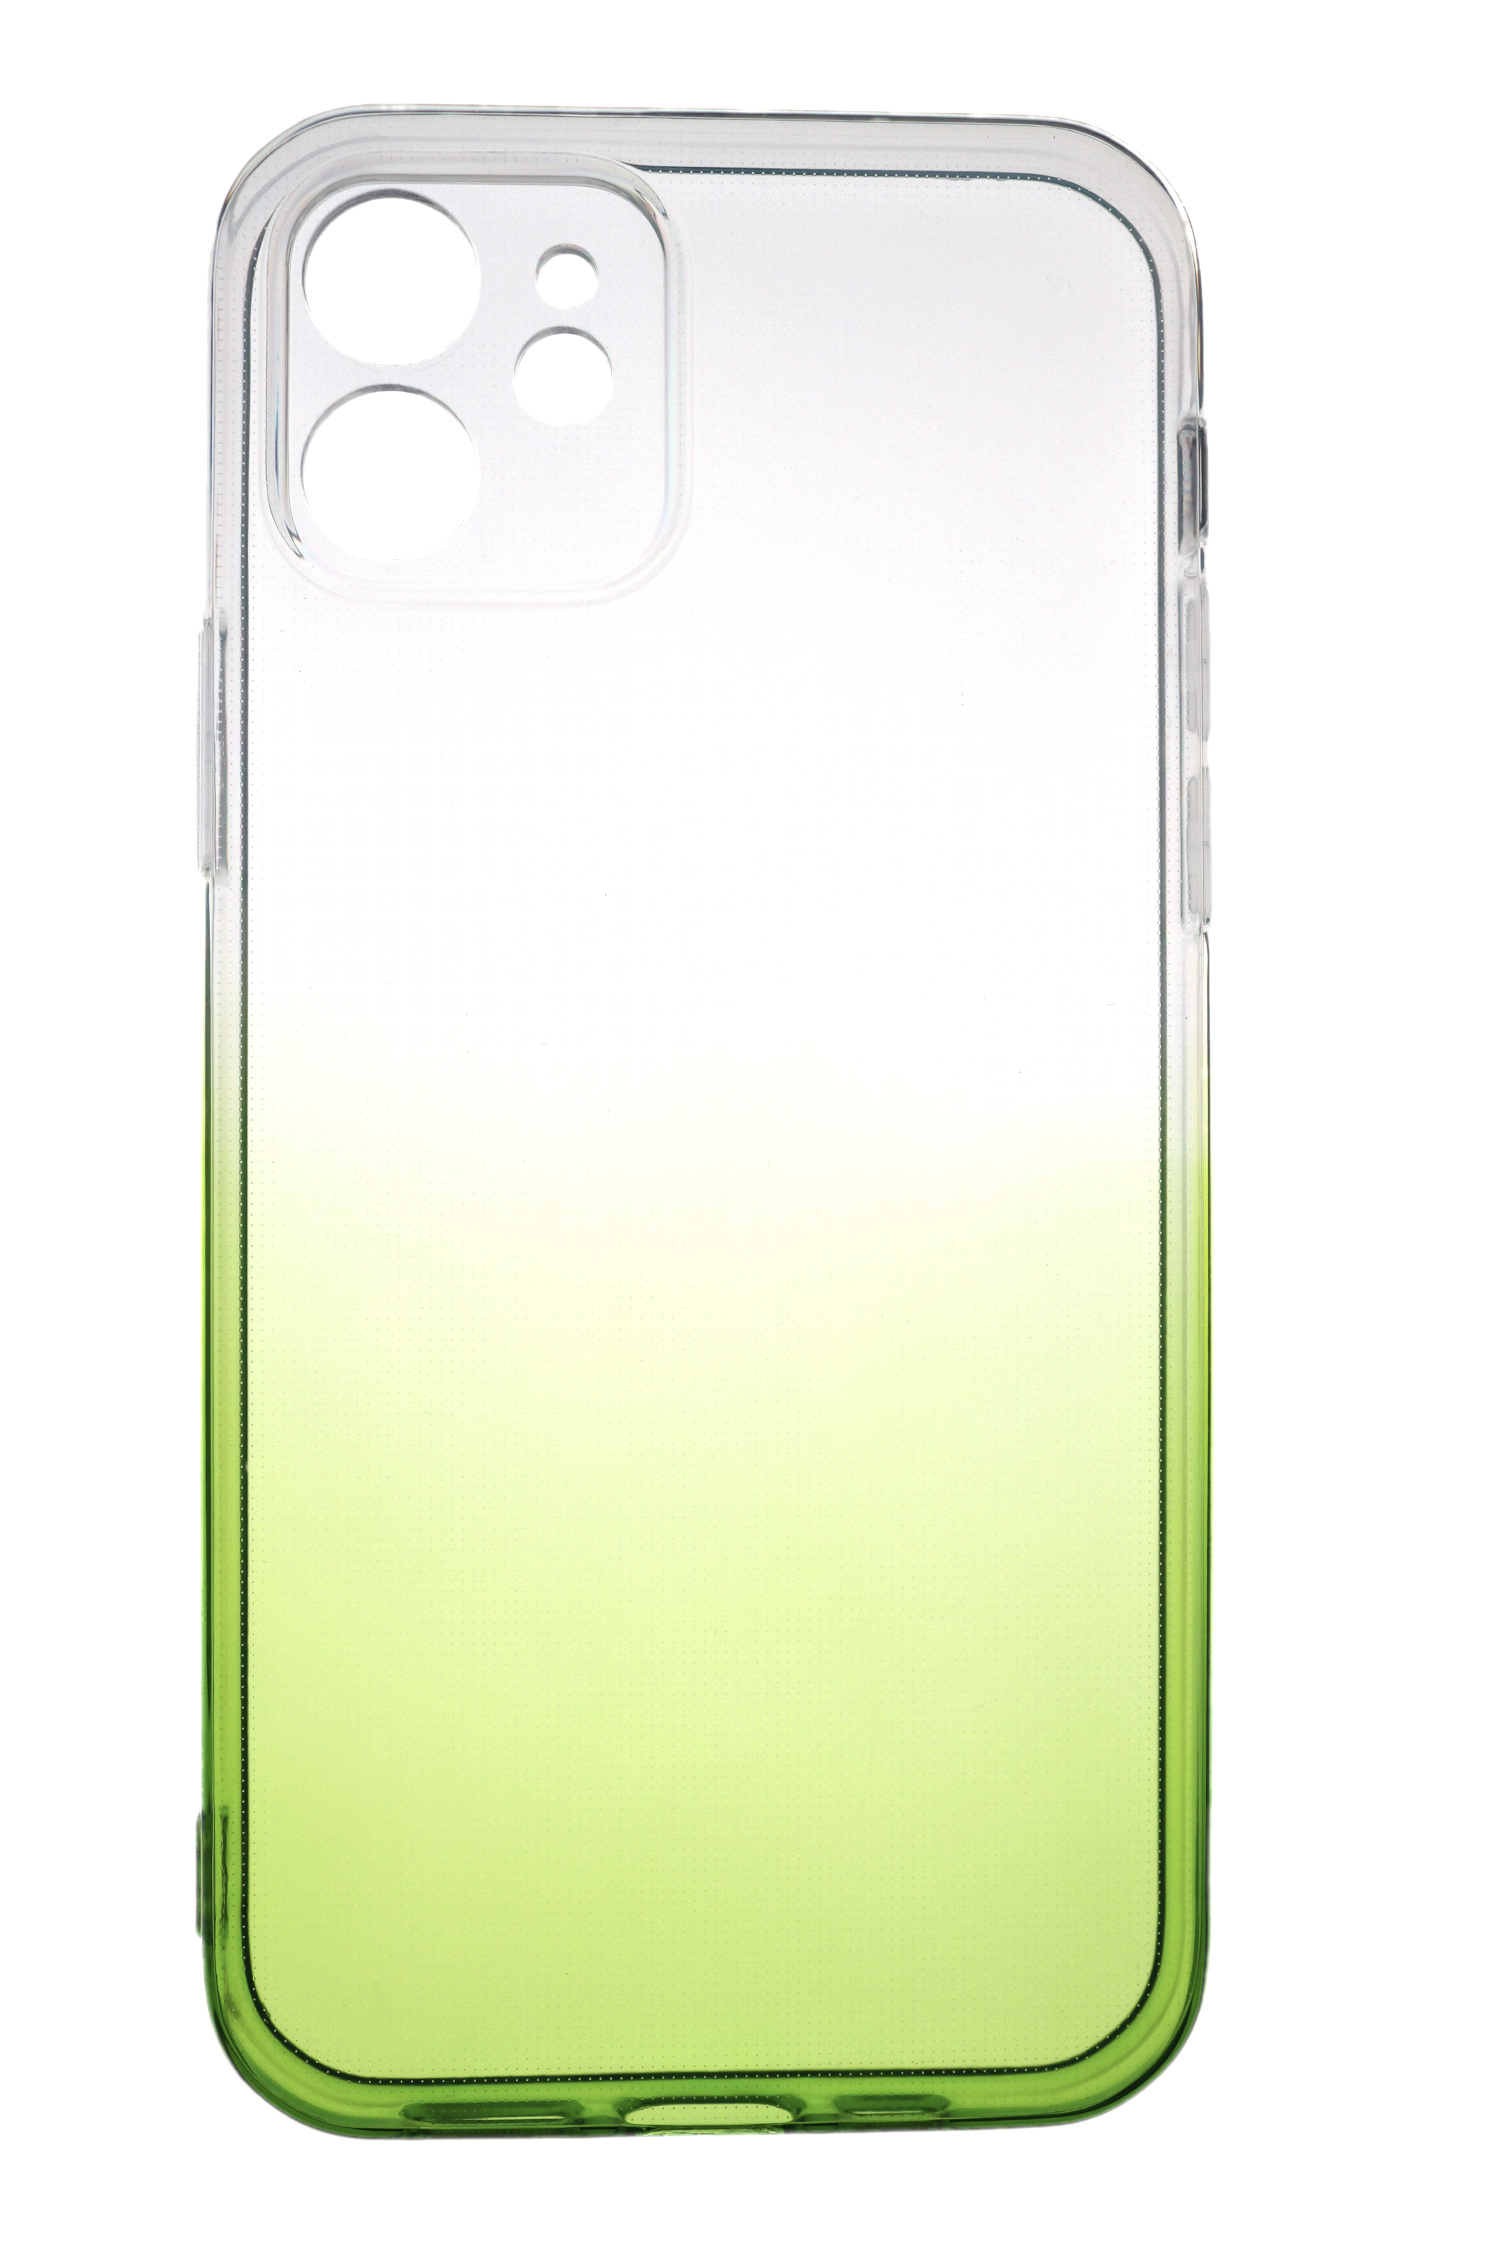 JAMCOVER 2.0 Pro, Case Transparent iPhone Grün, Strong, 12 12, TPU iPhone Apple, mm Backcover